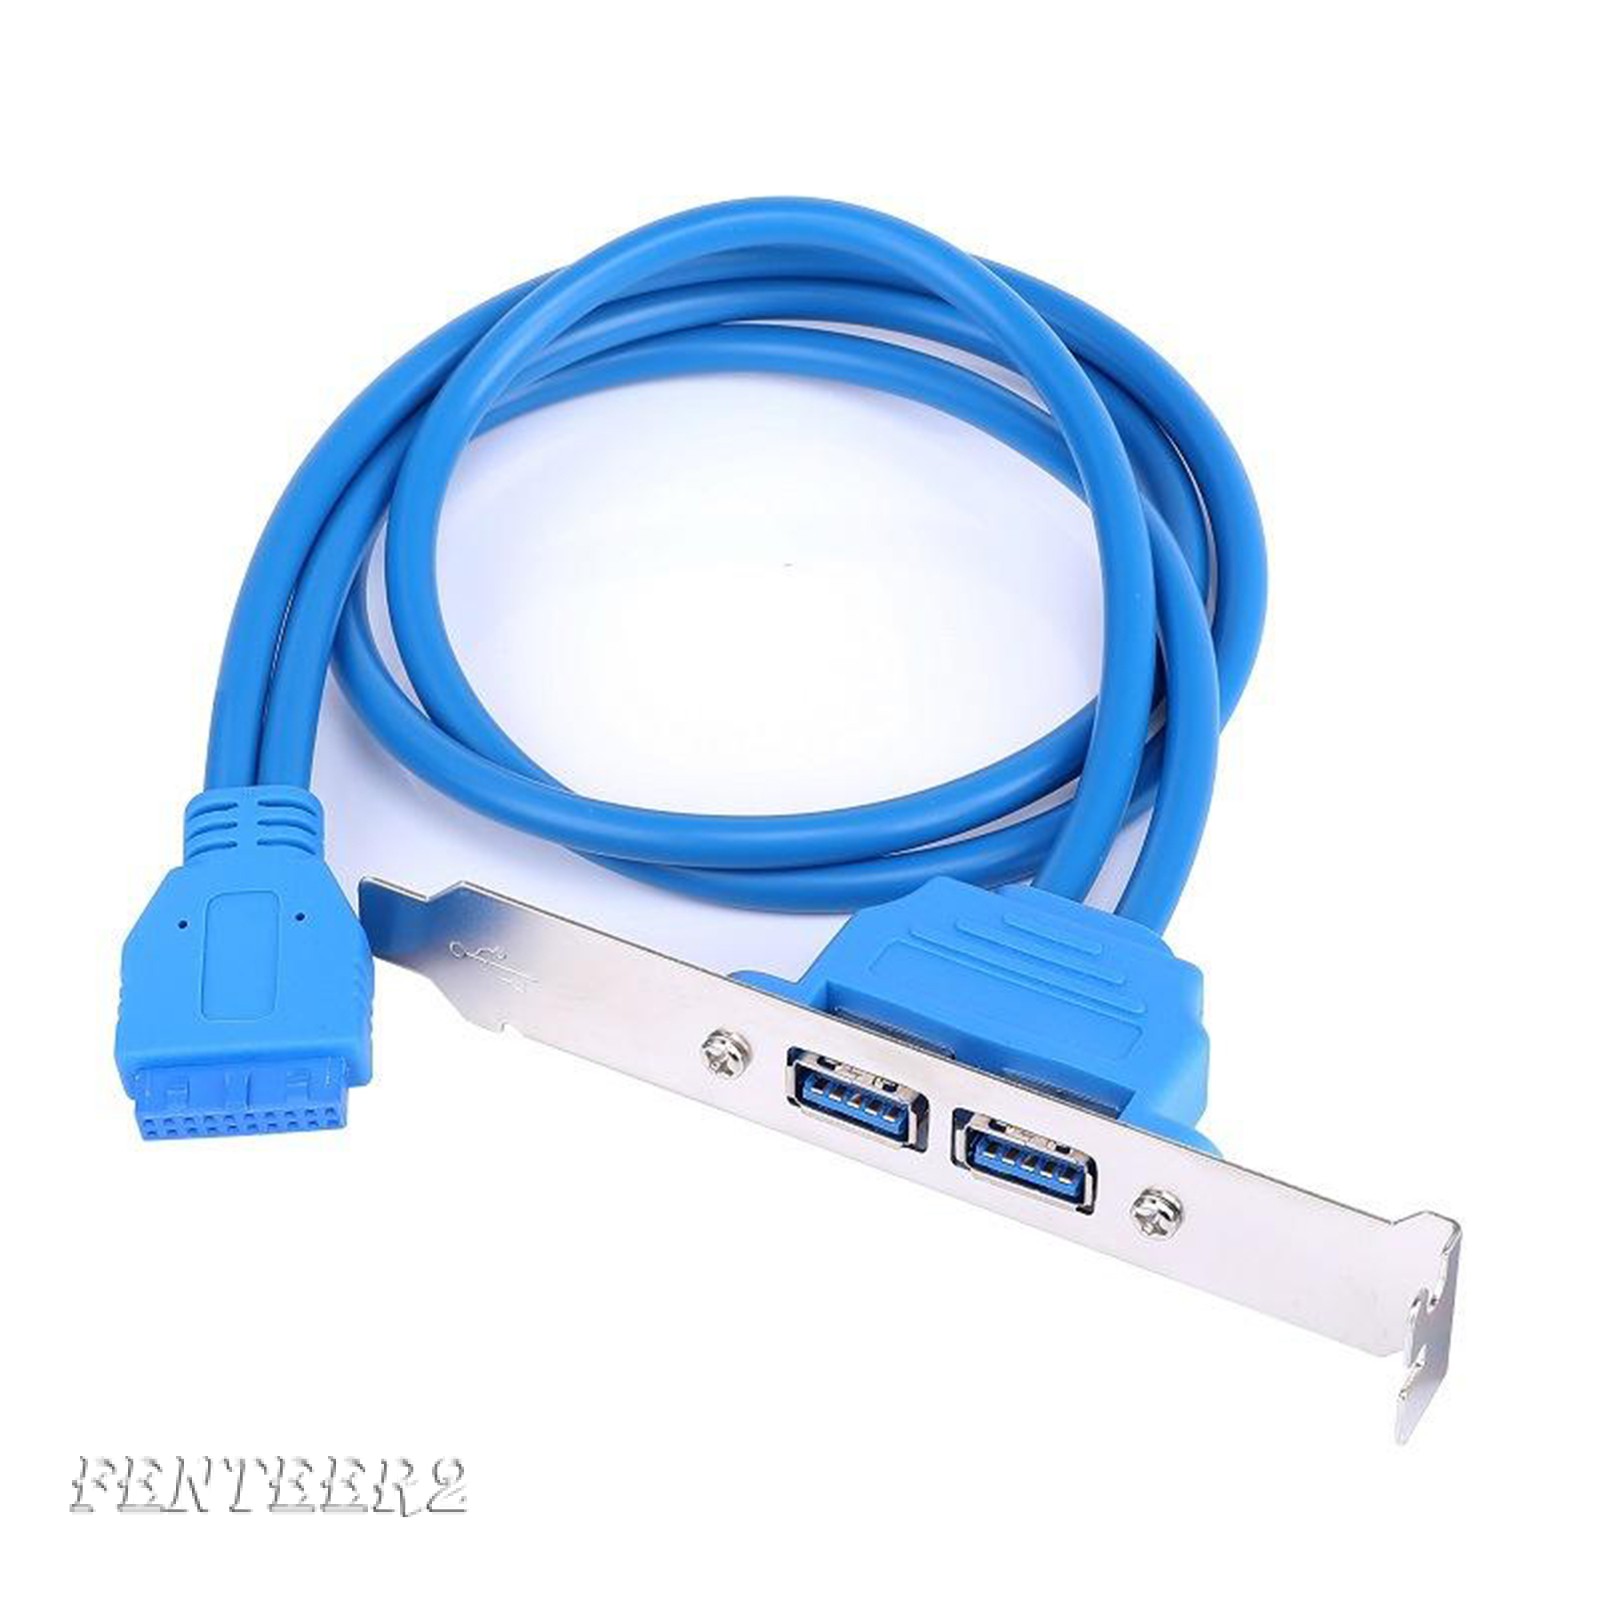 (Fenteer2 3c) Dual 2 Ports Usb 3.0 Back Panel To 20pin Header Cable With Bracket | BigBuy360 - bigbuy360.vn